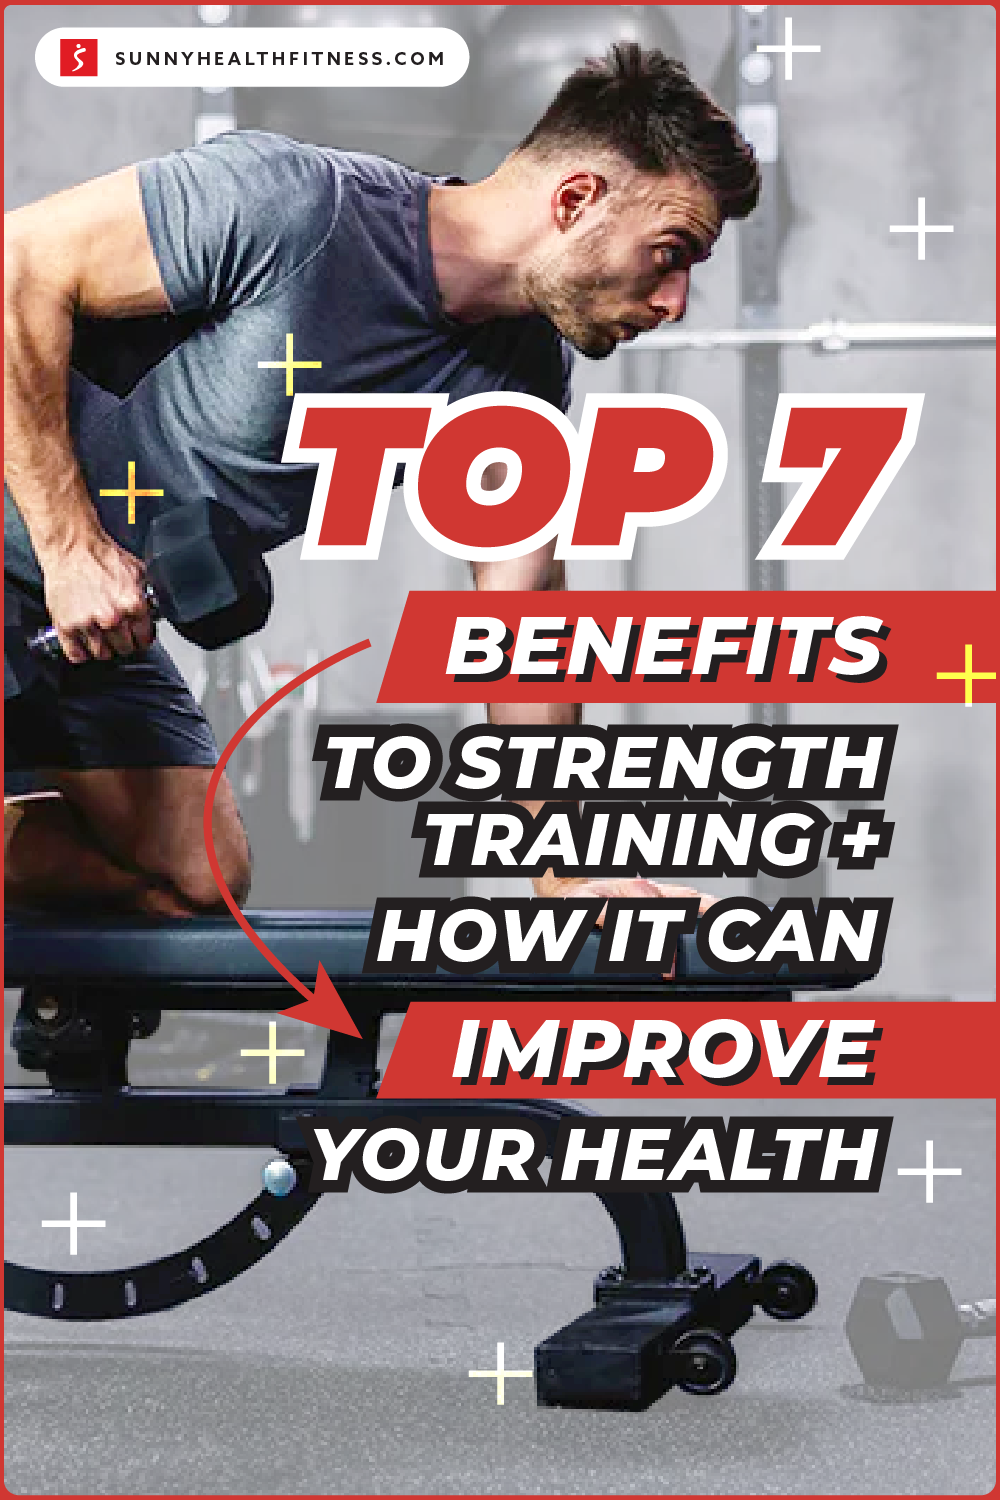 Top 7 Benefits to Strength Training